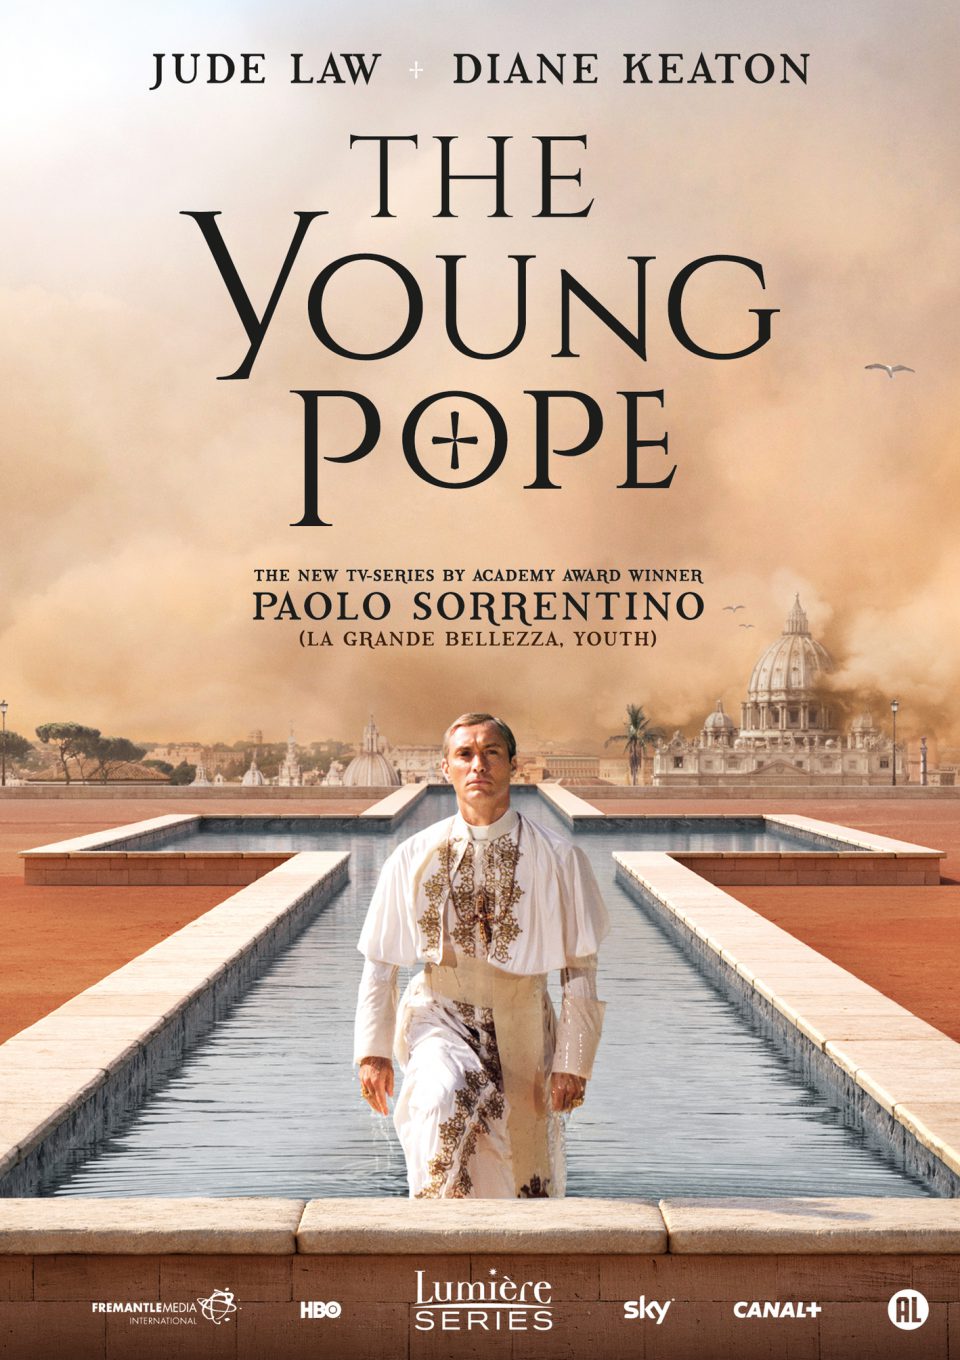 lum-the-young-pope_2d